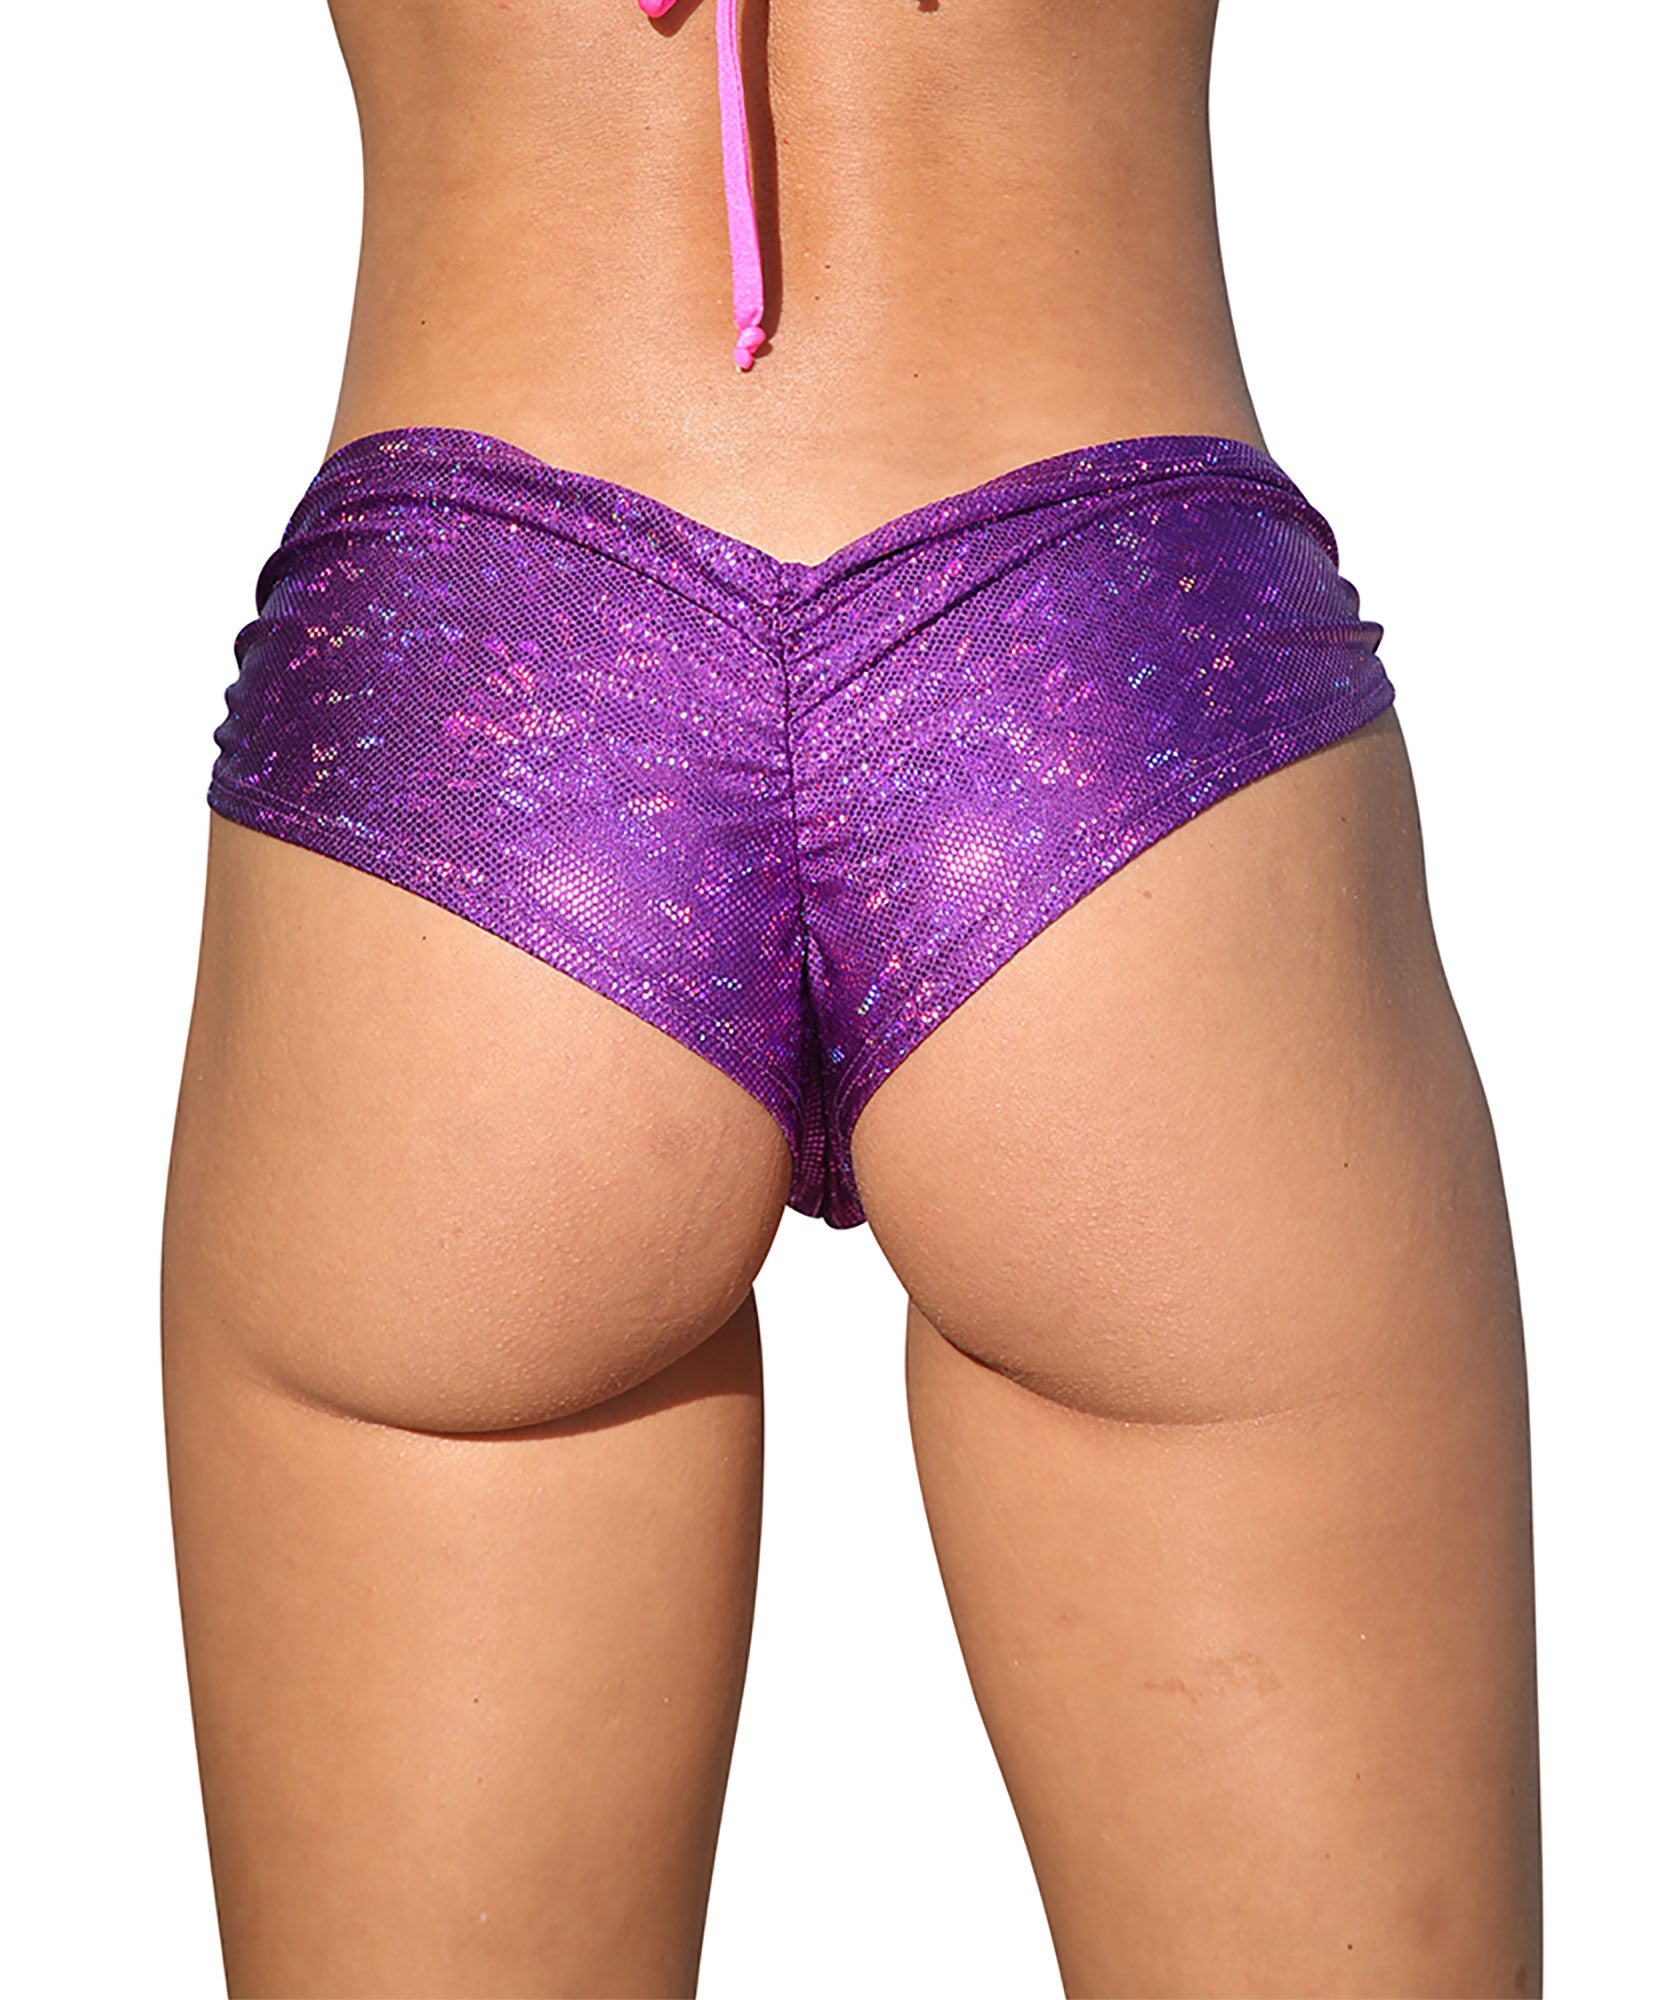 Purple Cheeky Booty Shorts Holographic Rave Wear